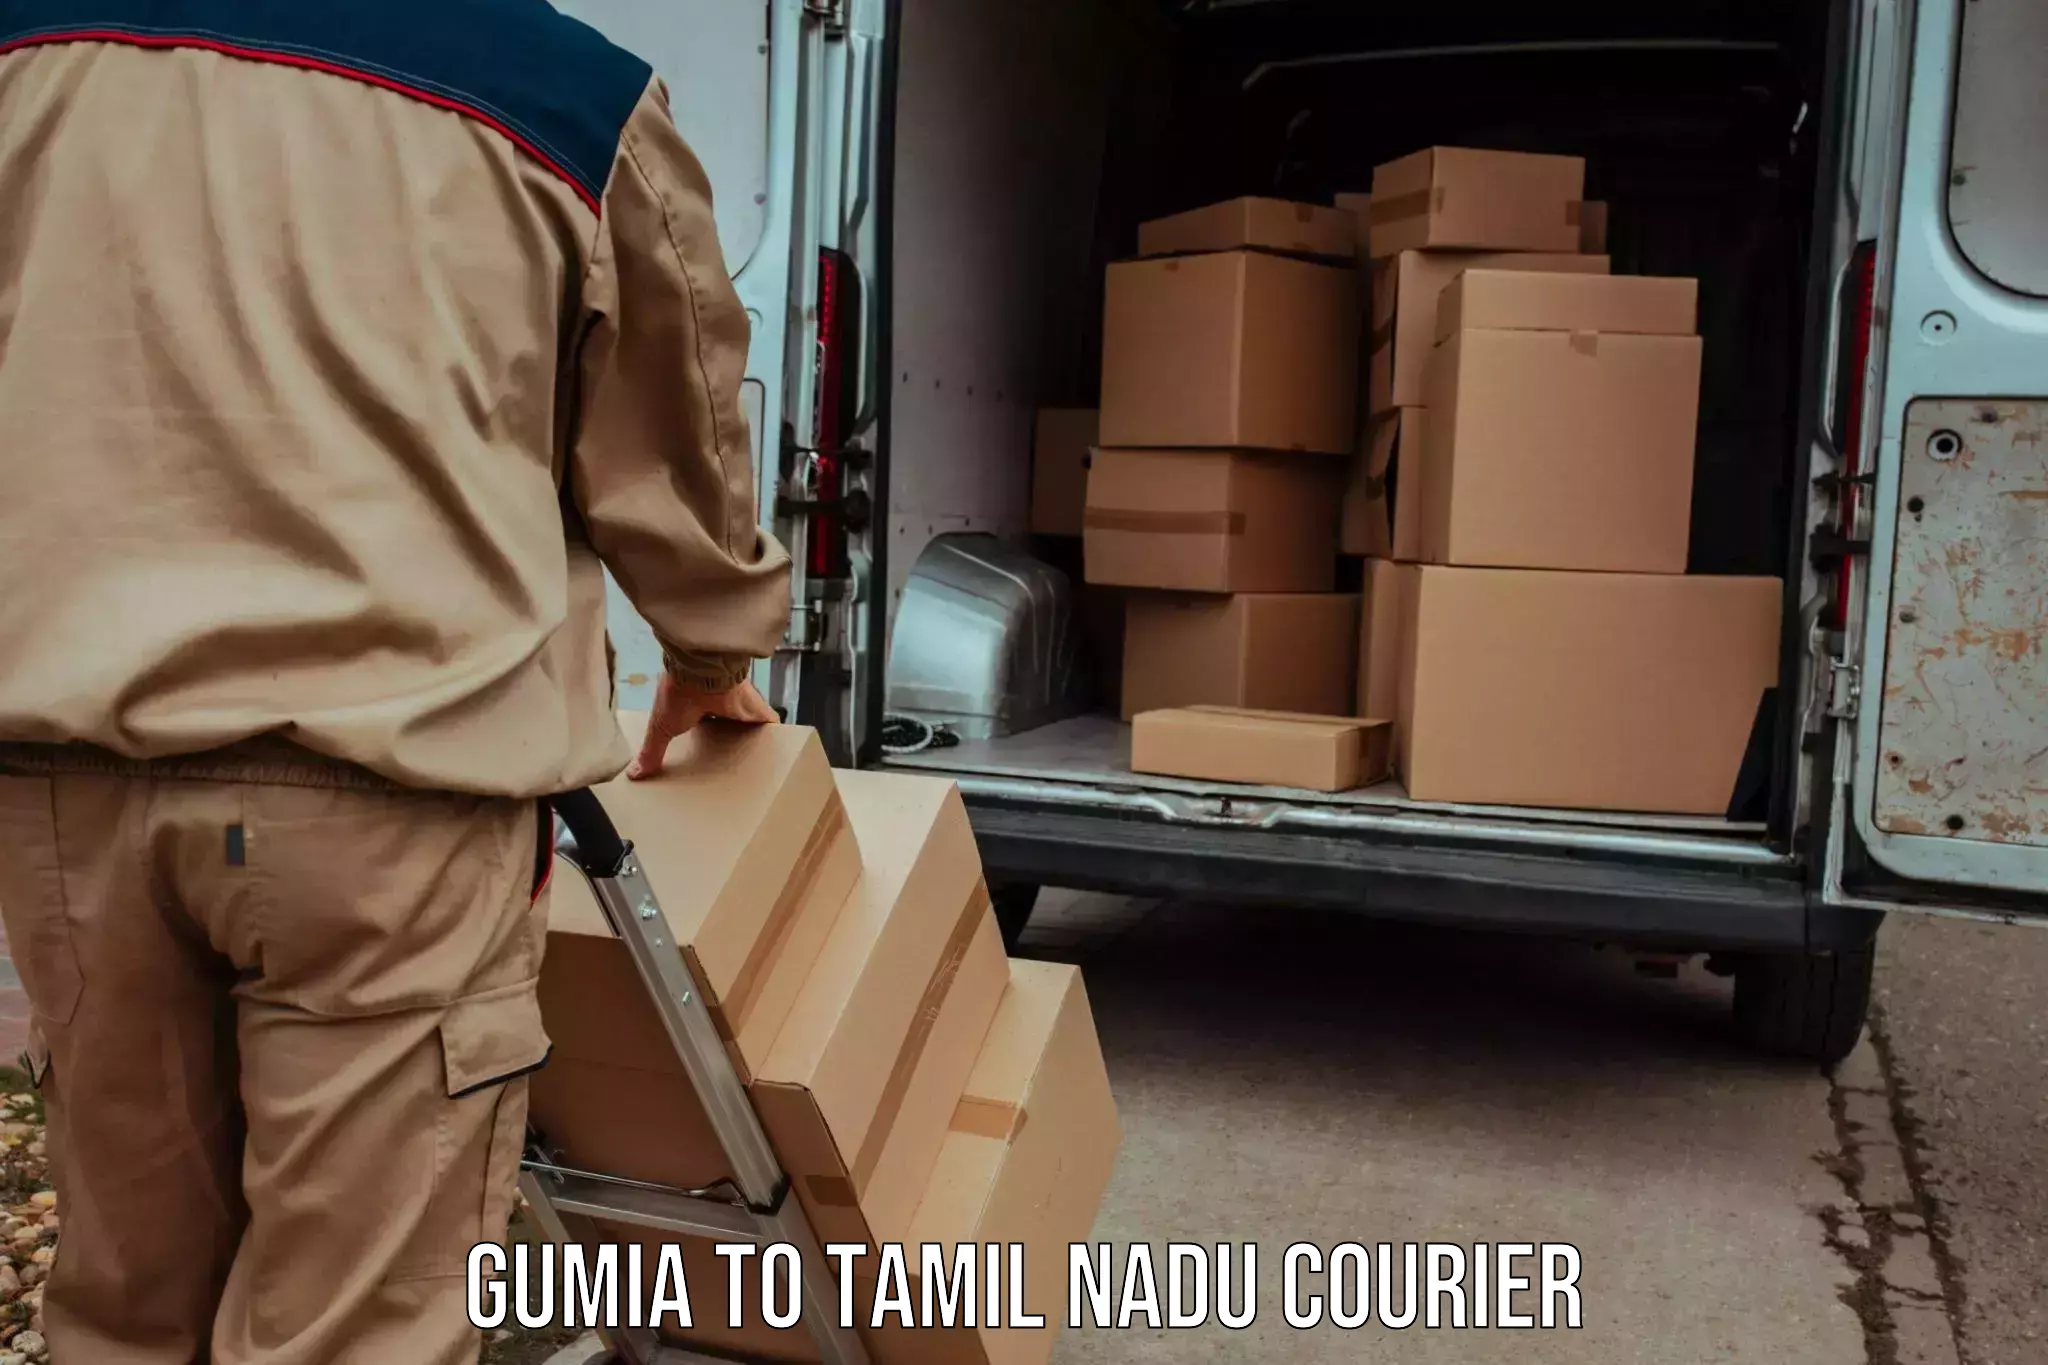 Nationwide shipping capabilities Gumia to Saveetha Institute of Medical and Technical Sciences Chennai